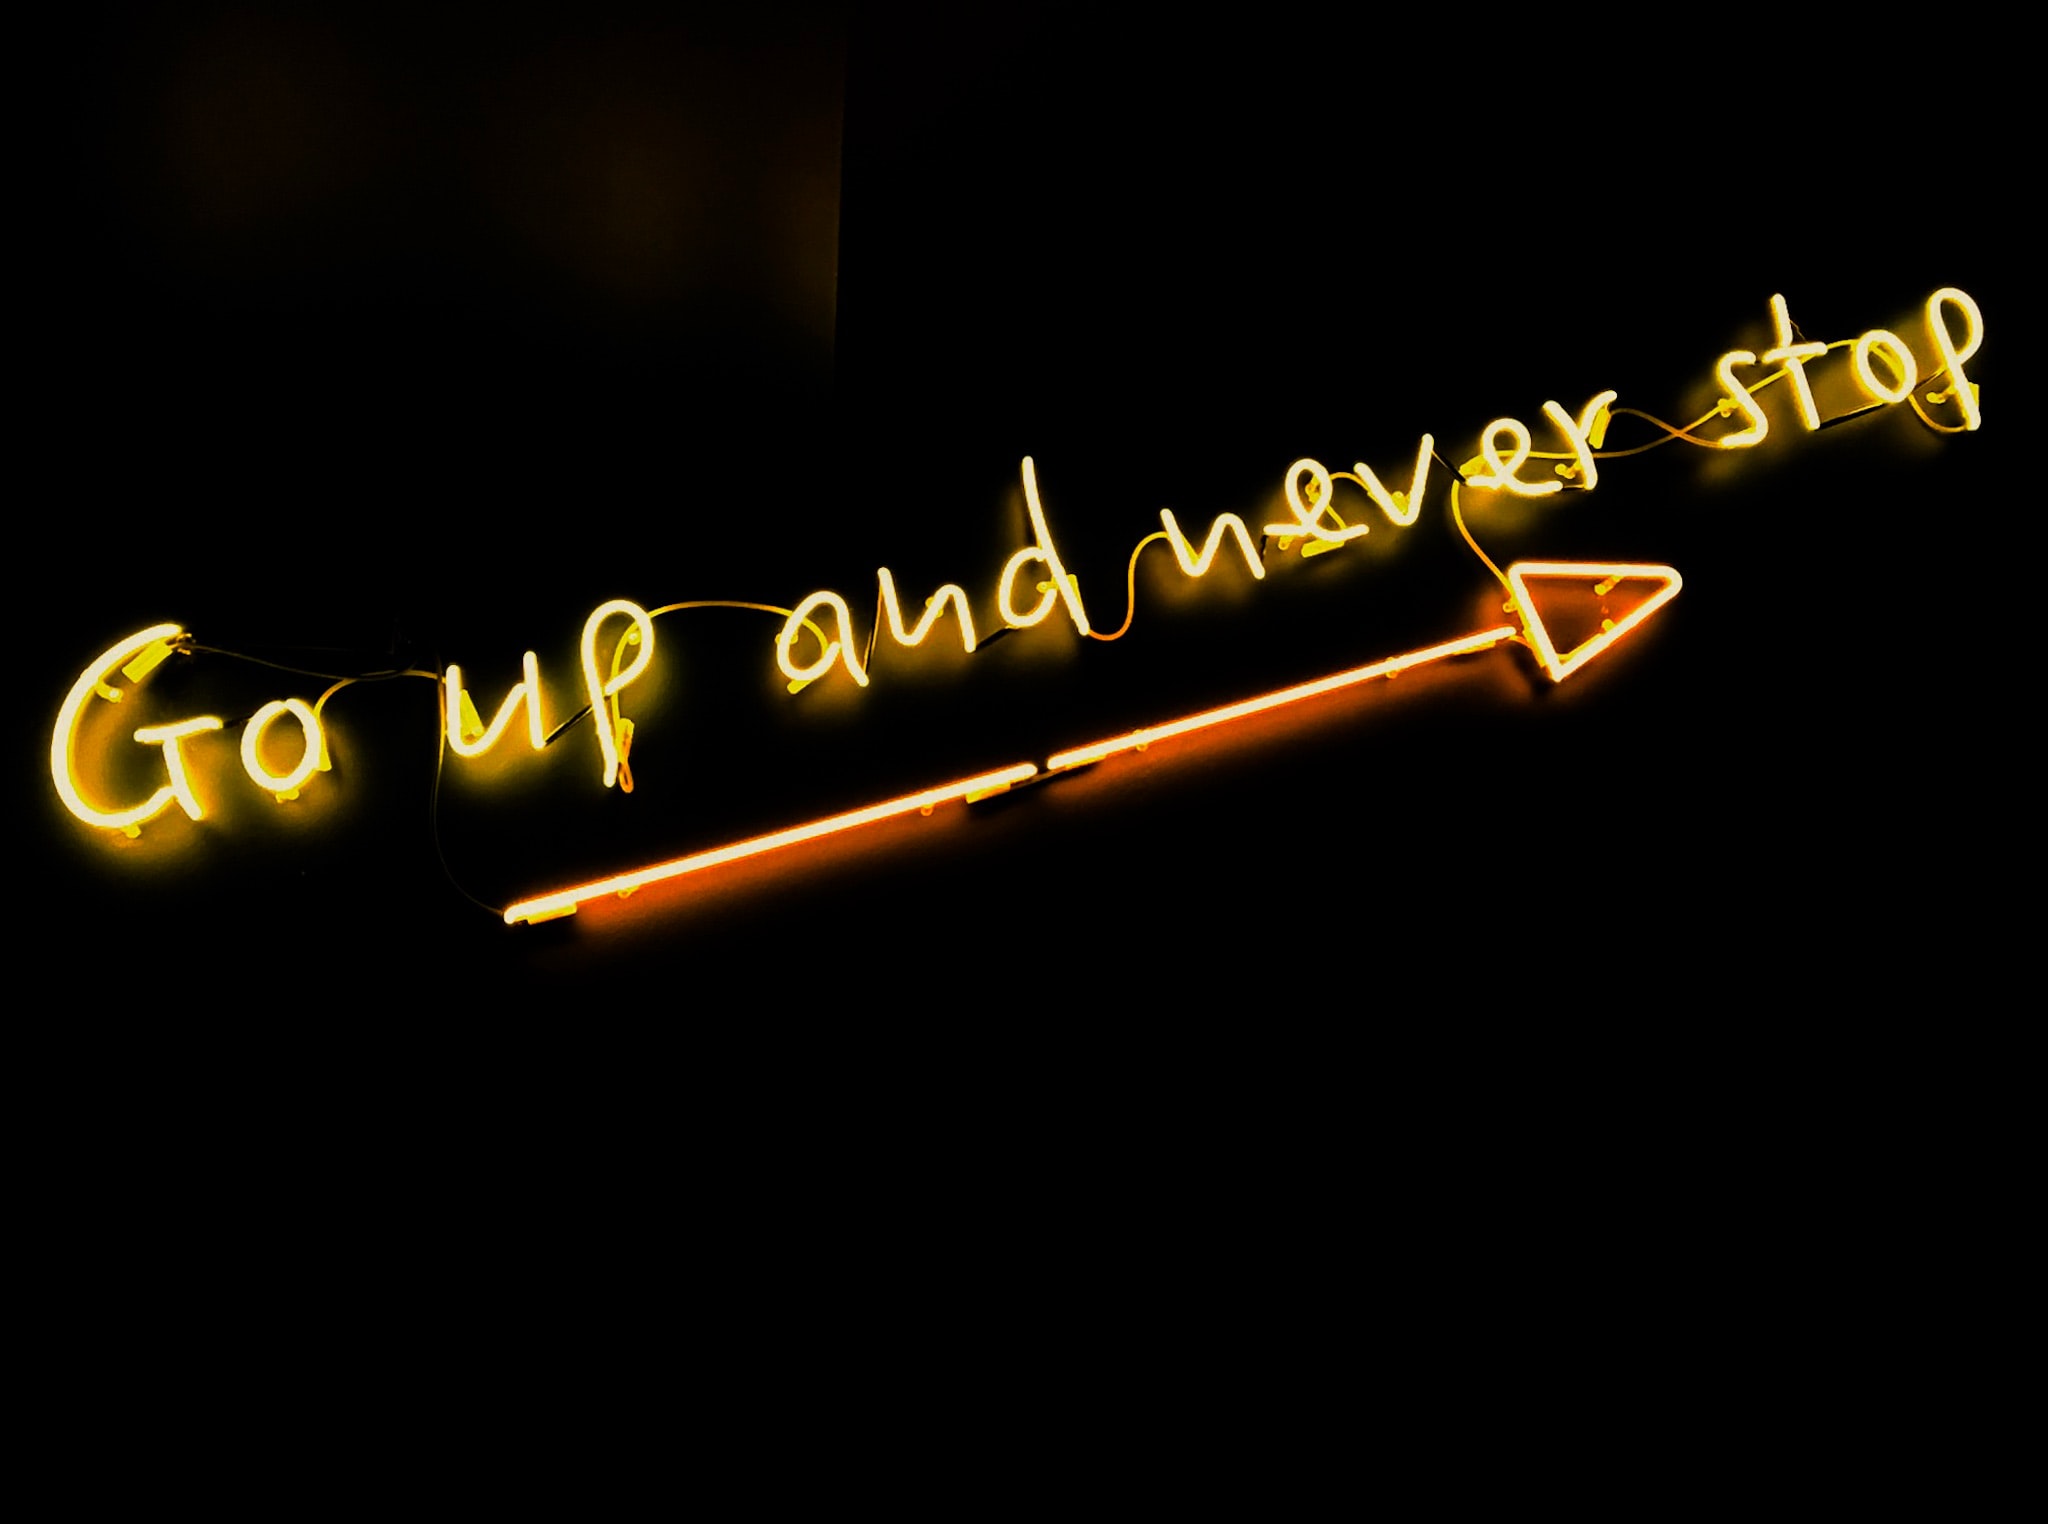 "Go up and never stop" on neon letters